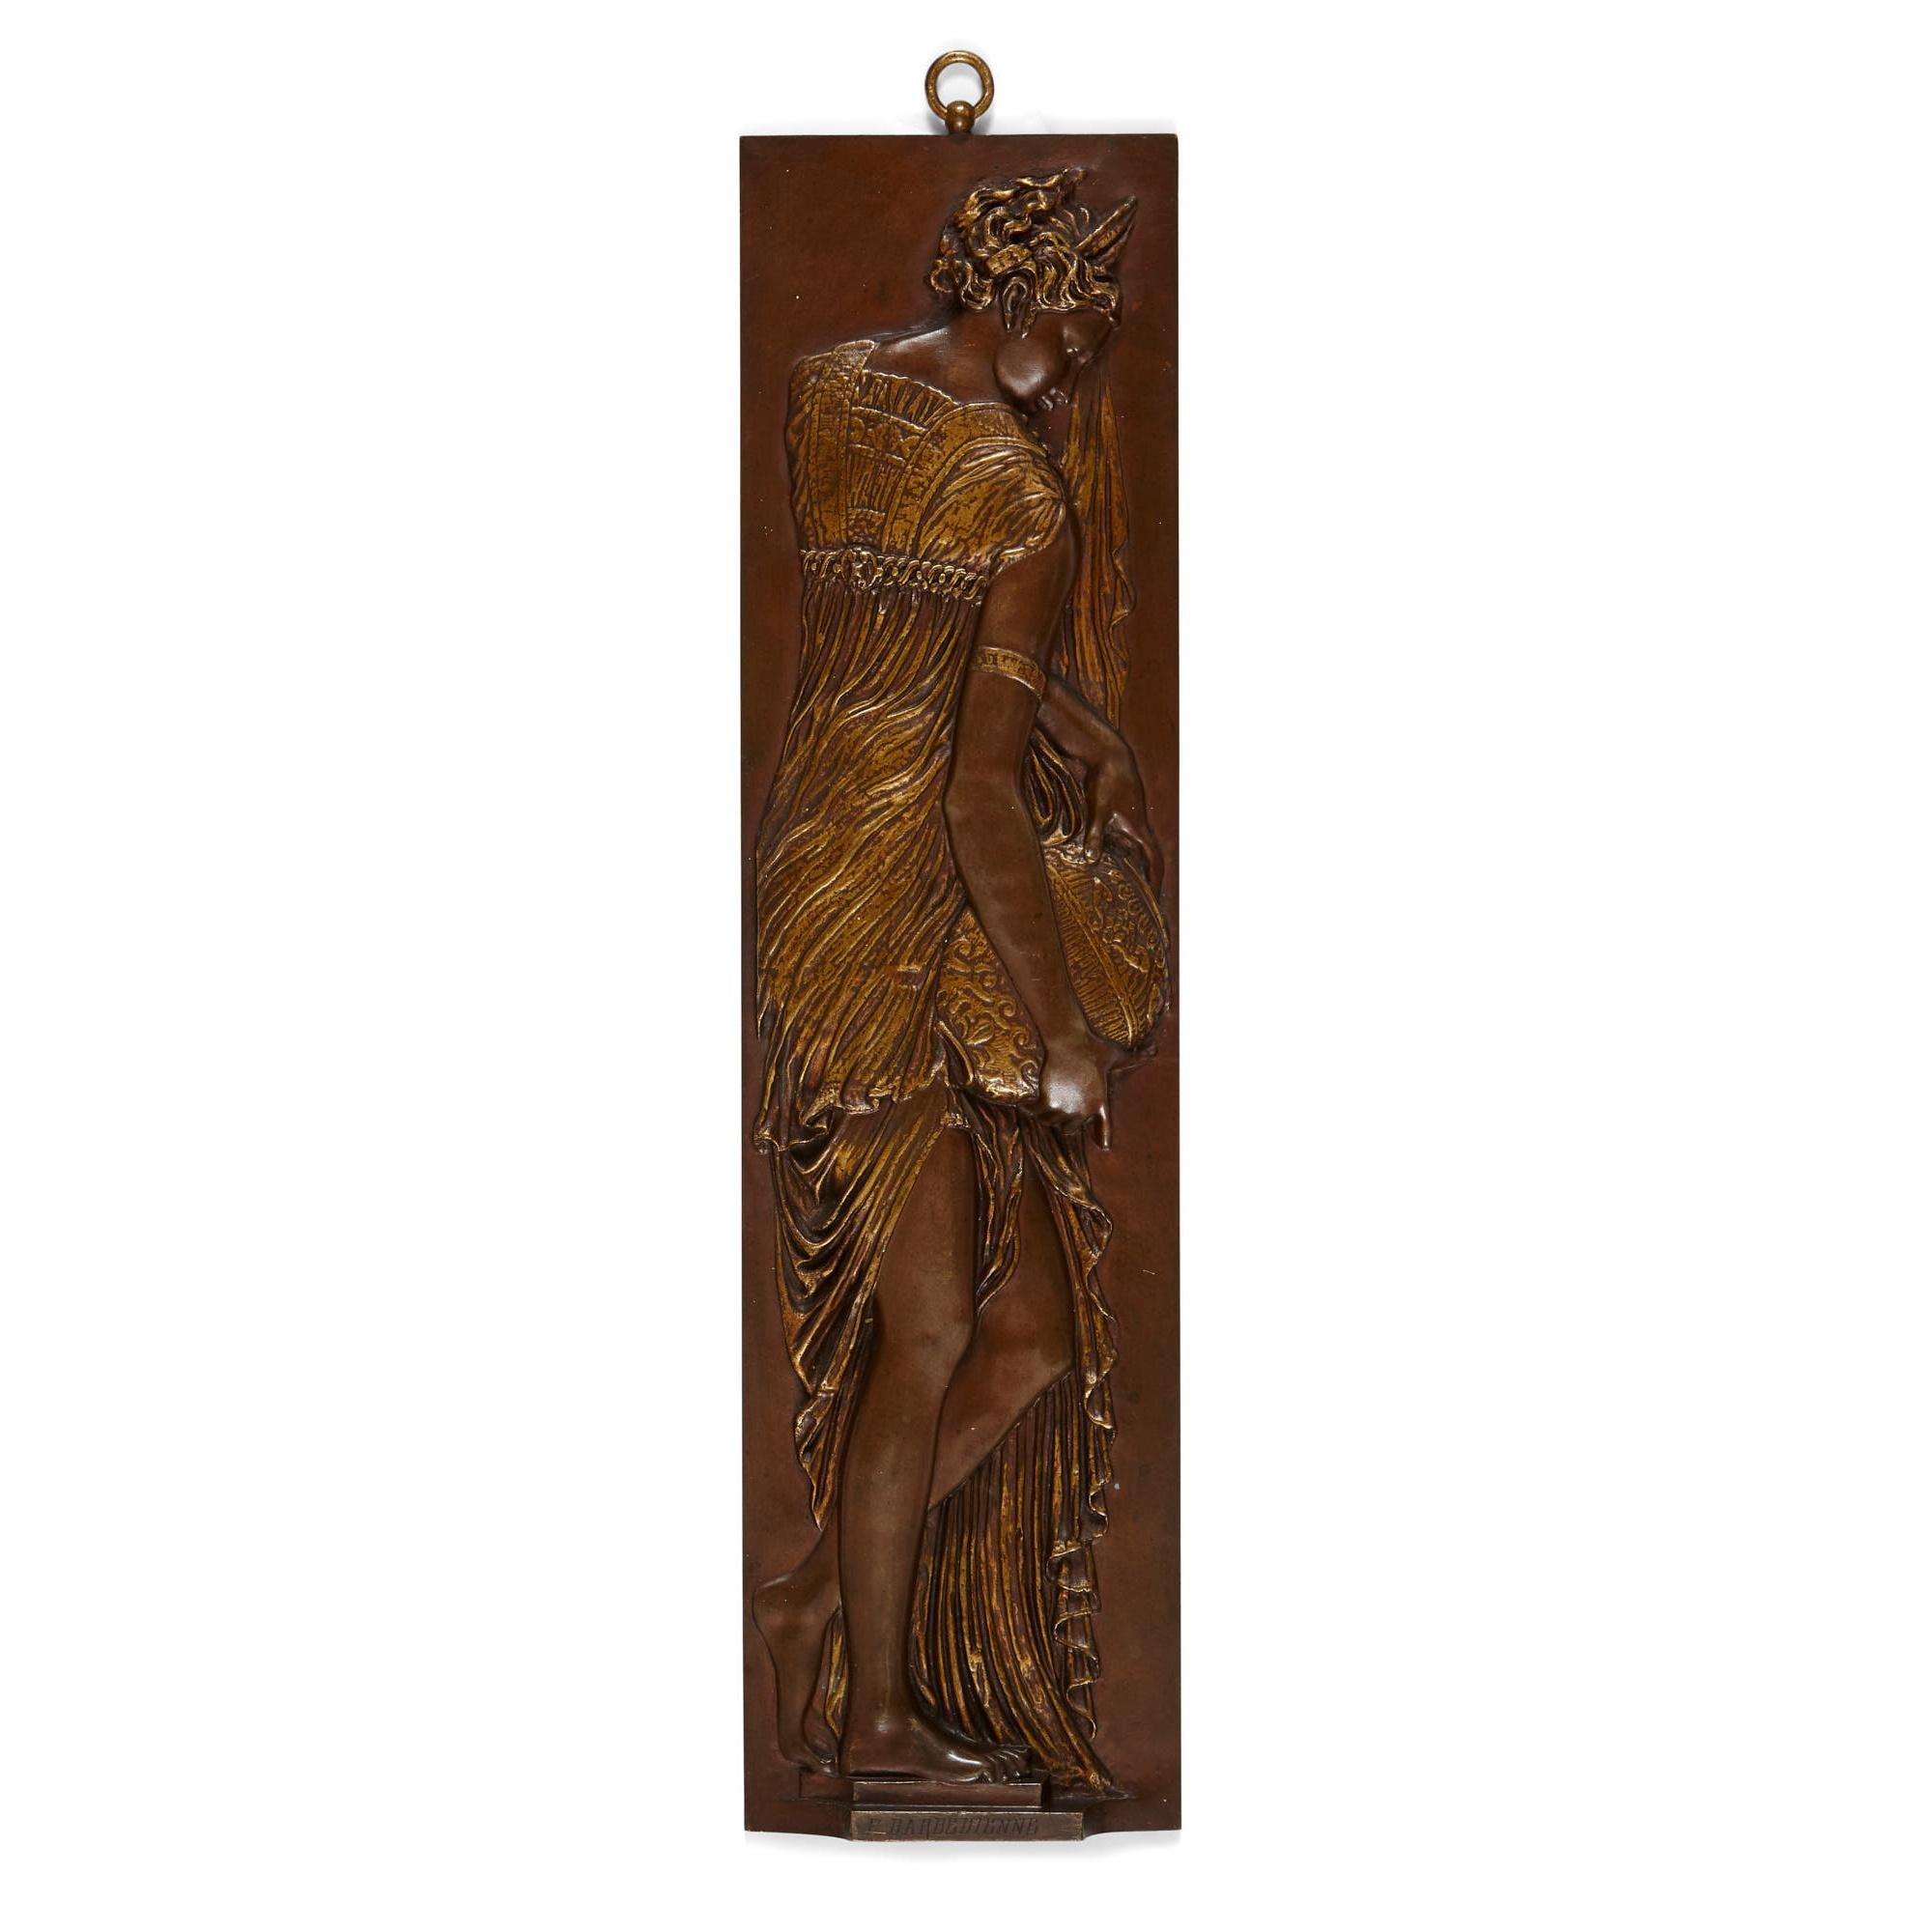 Four antique bronze plaques depicting water-nymphs, by Ferdinand Barbedienne
French, 19th century.
Measures: Height 47cm, width 12cm, depth 2.5cm

Finely cast in relief from patinated bronze with parcel gilt patina, these French 19th Century panels